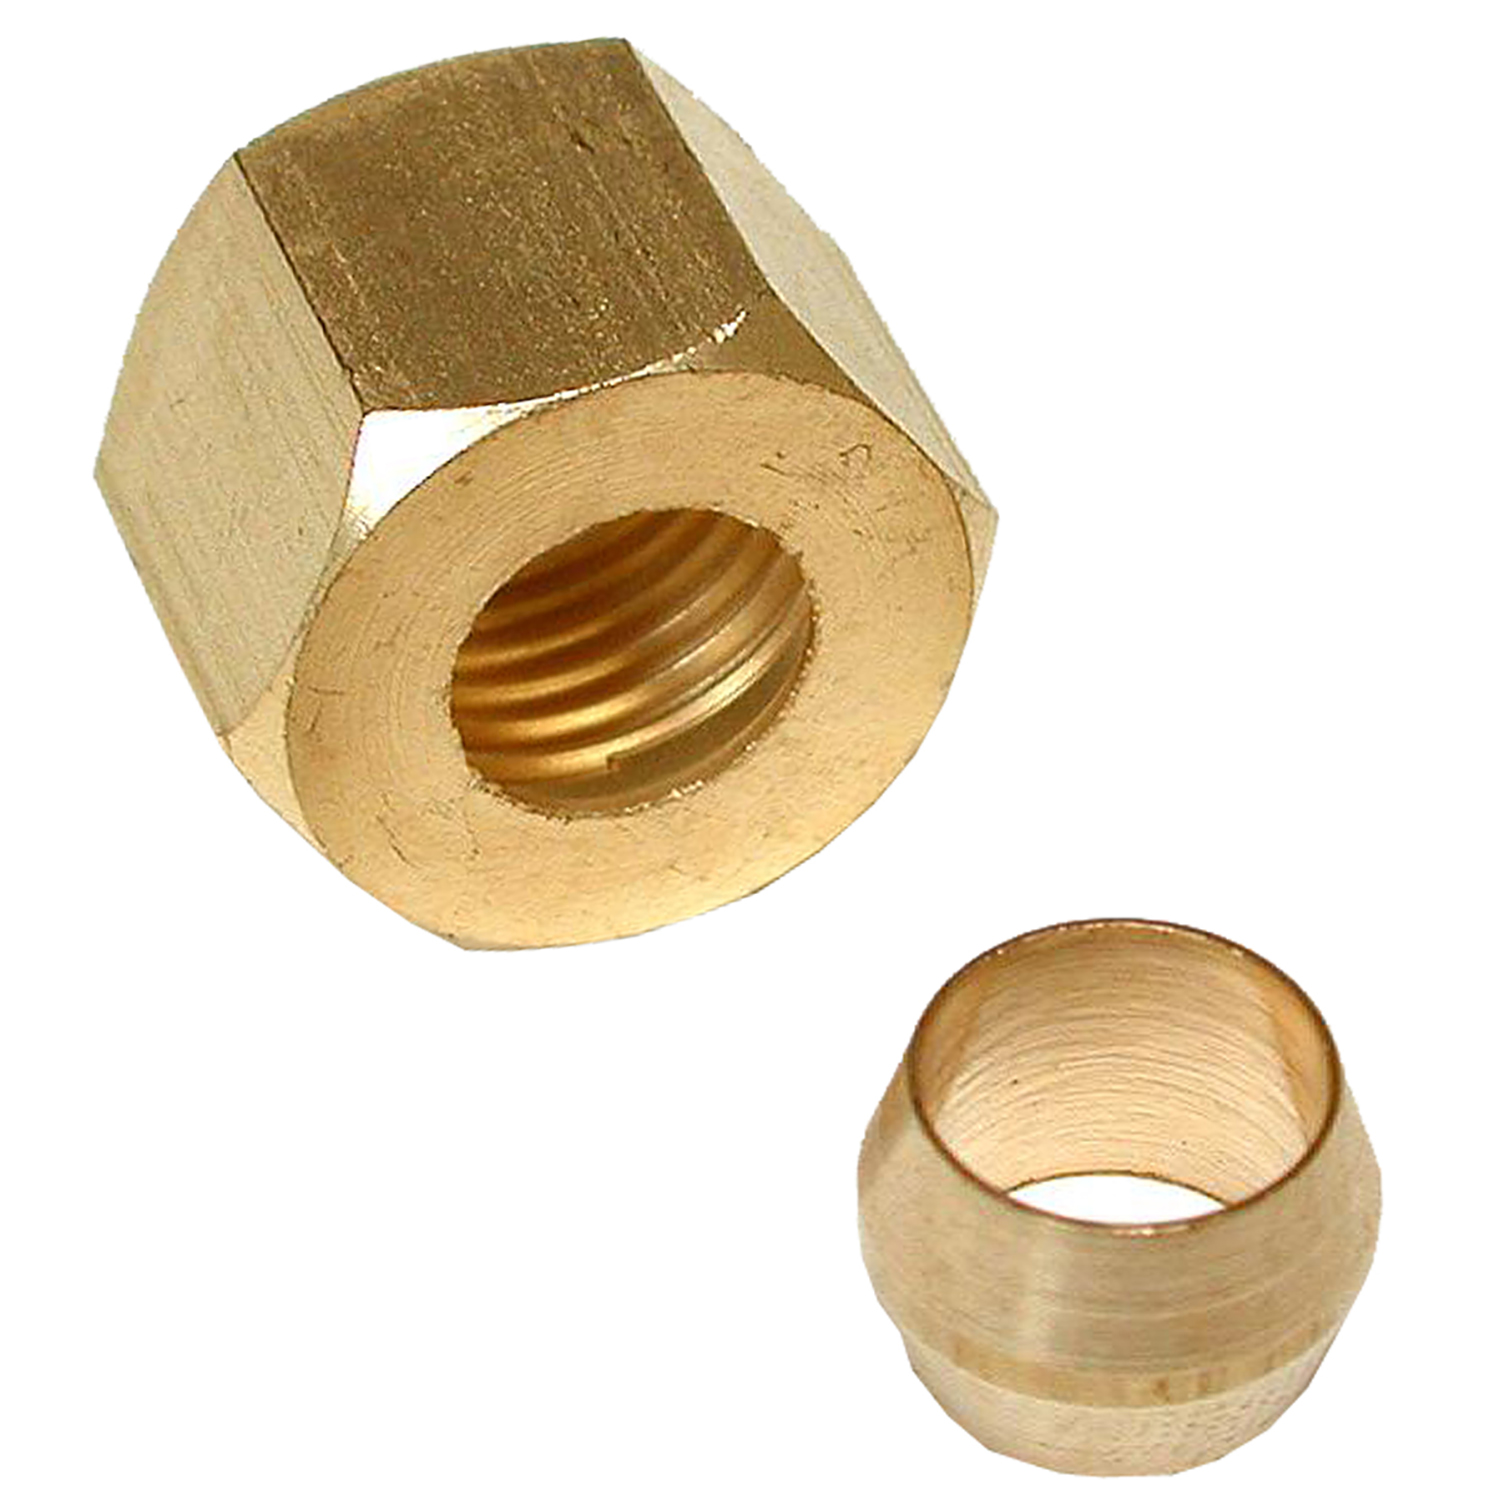 17-6115 Nut and Sleeve, 1/4 in, Compression, Brass